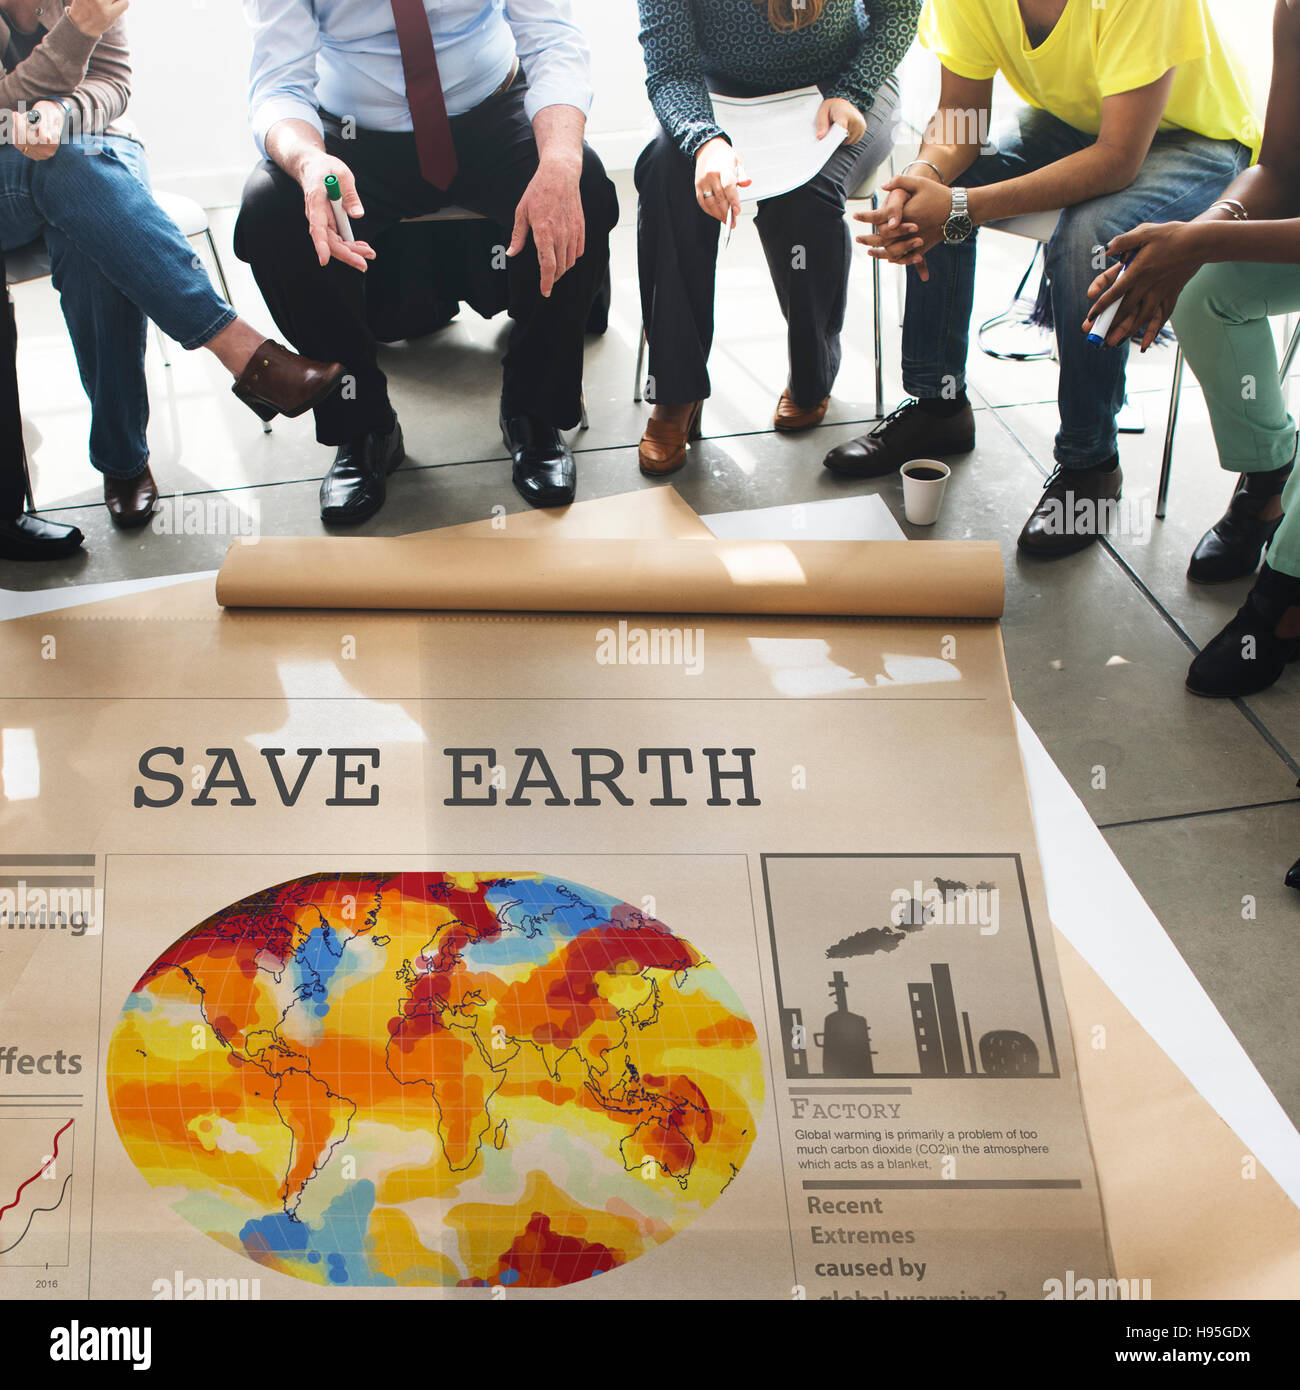 Save Earth Environment Conservation Protection Concept Stock Photo